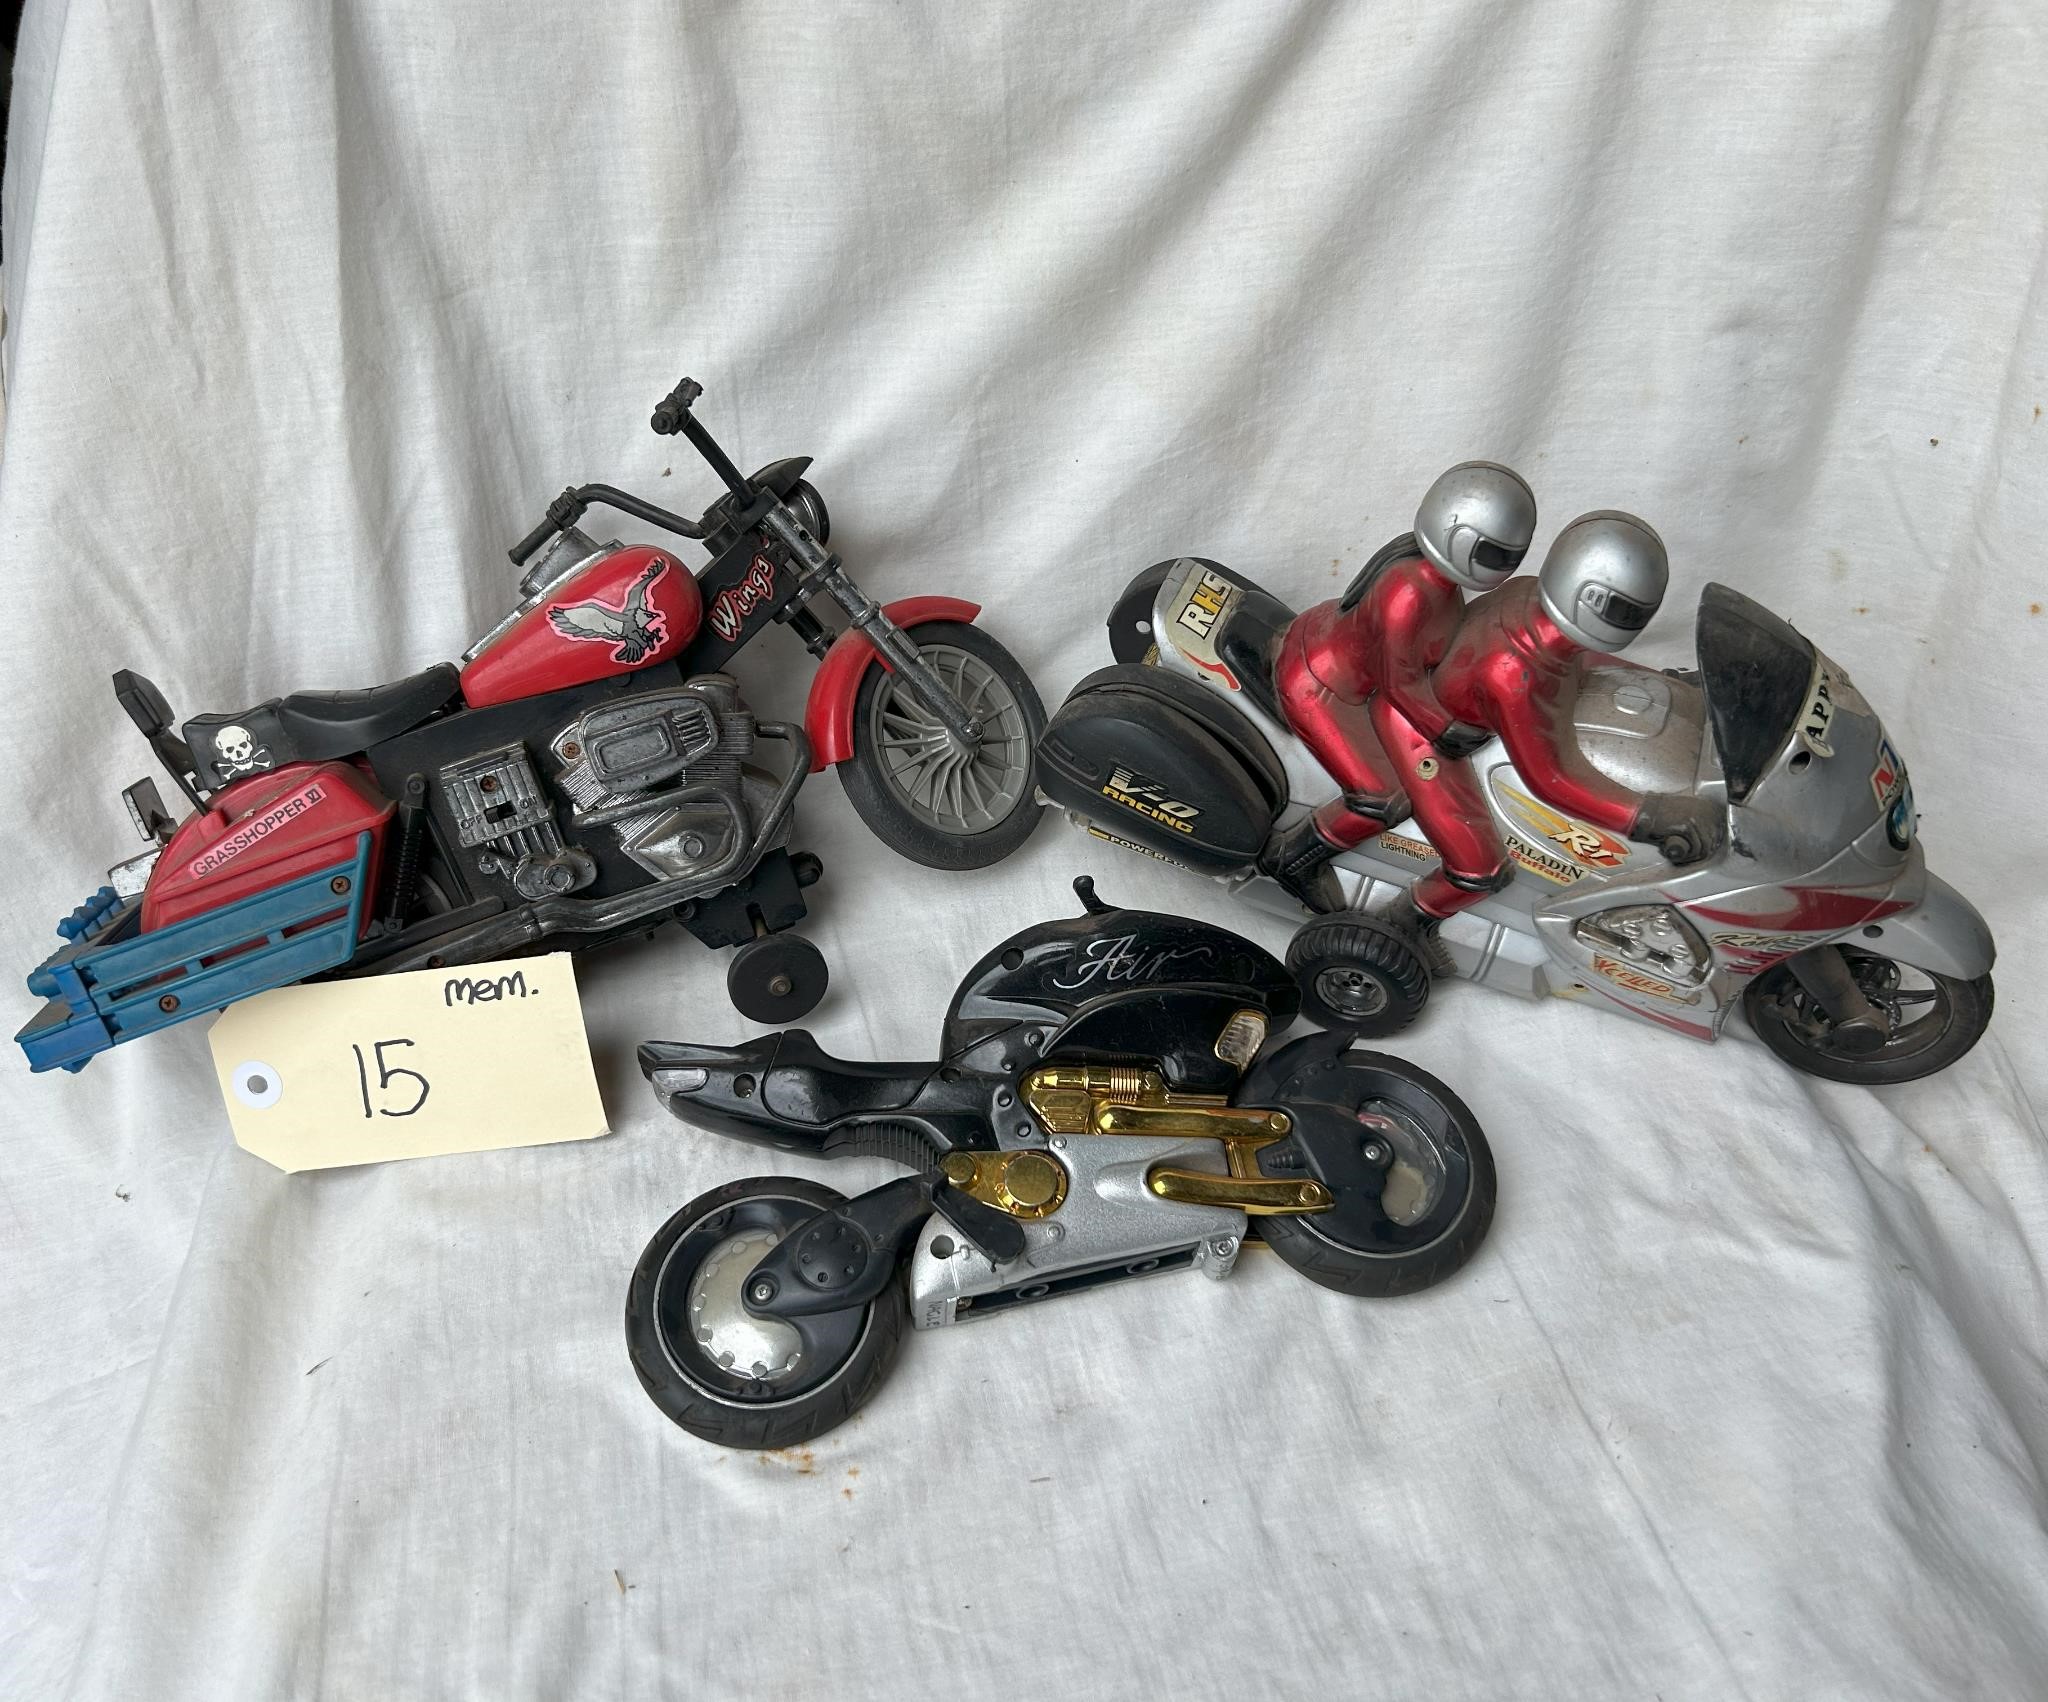 3 motorcycle toys